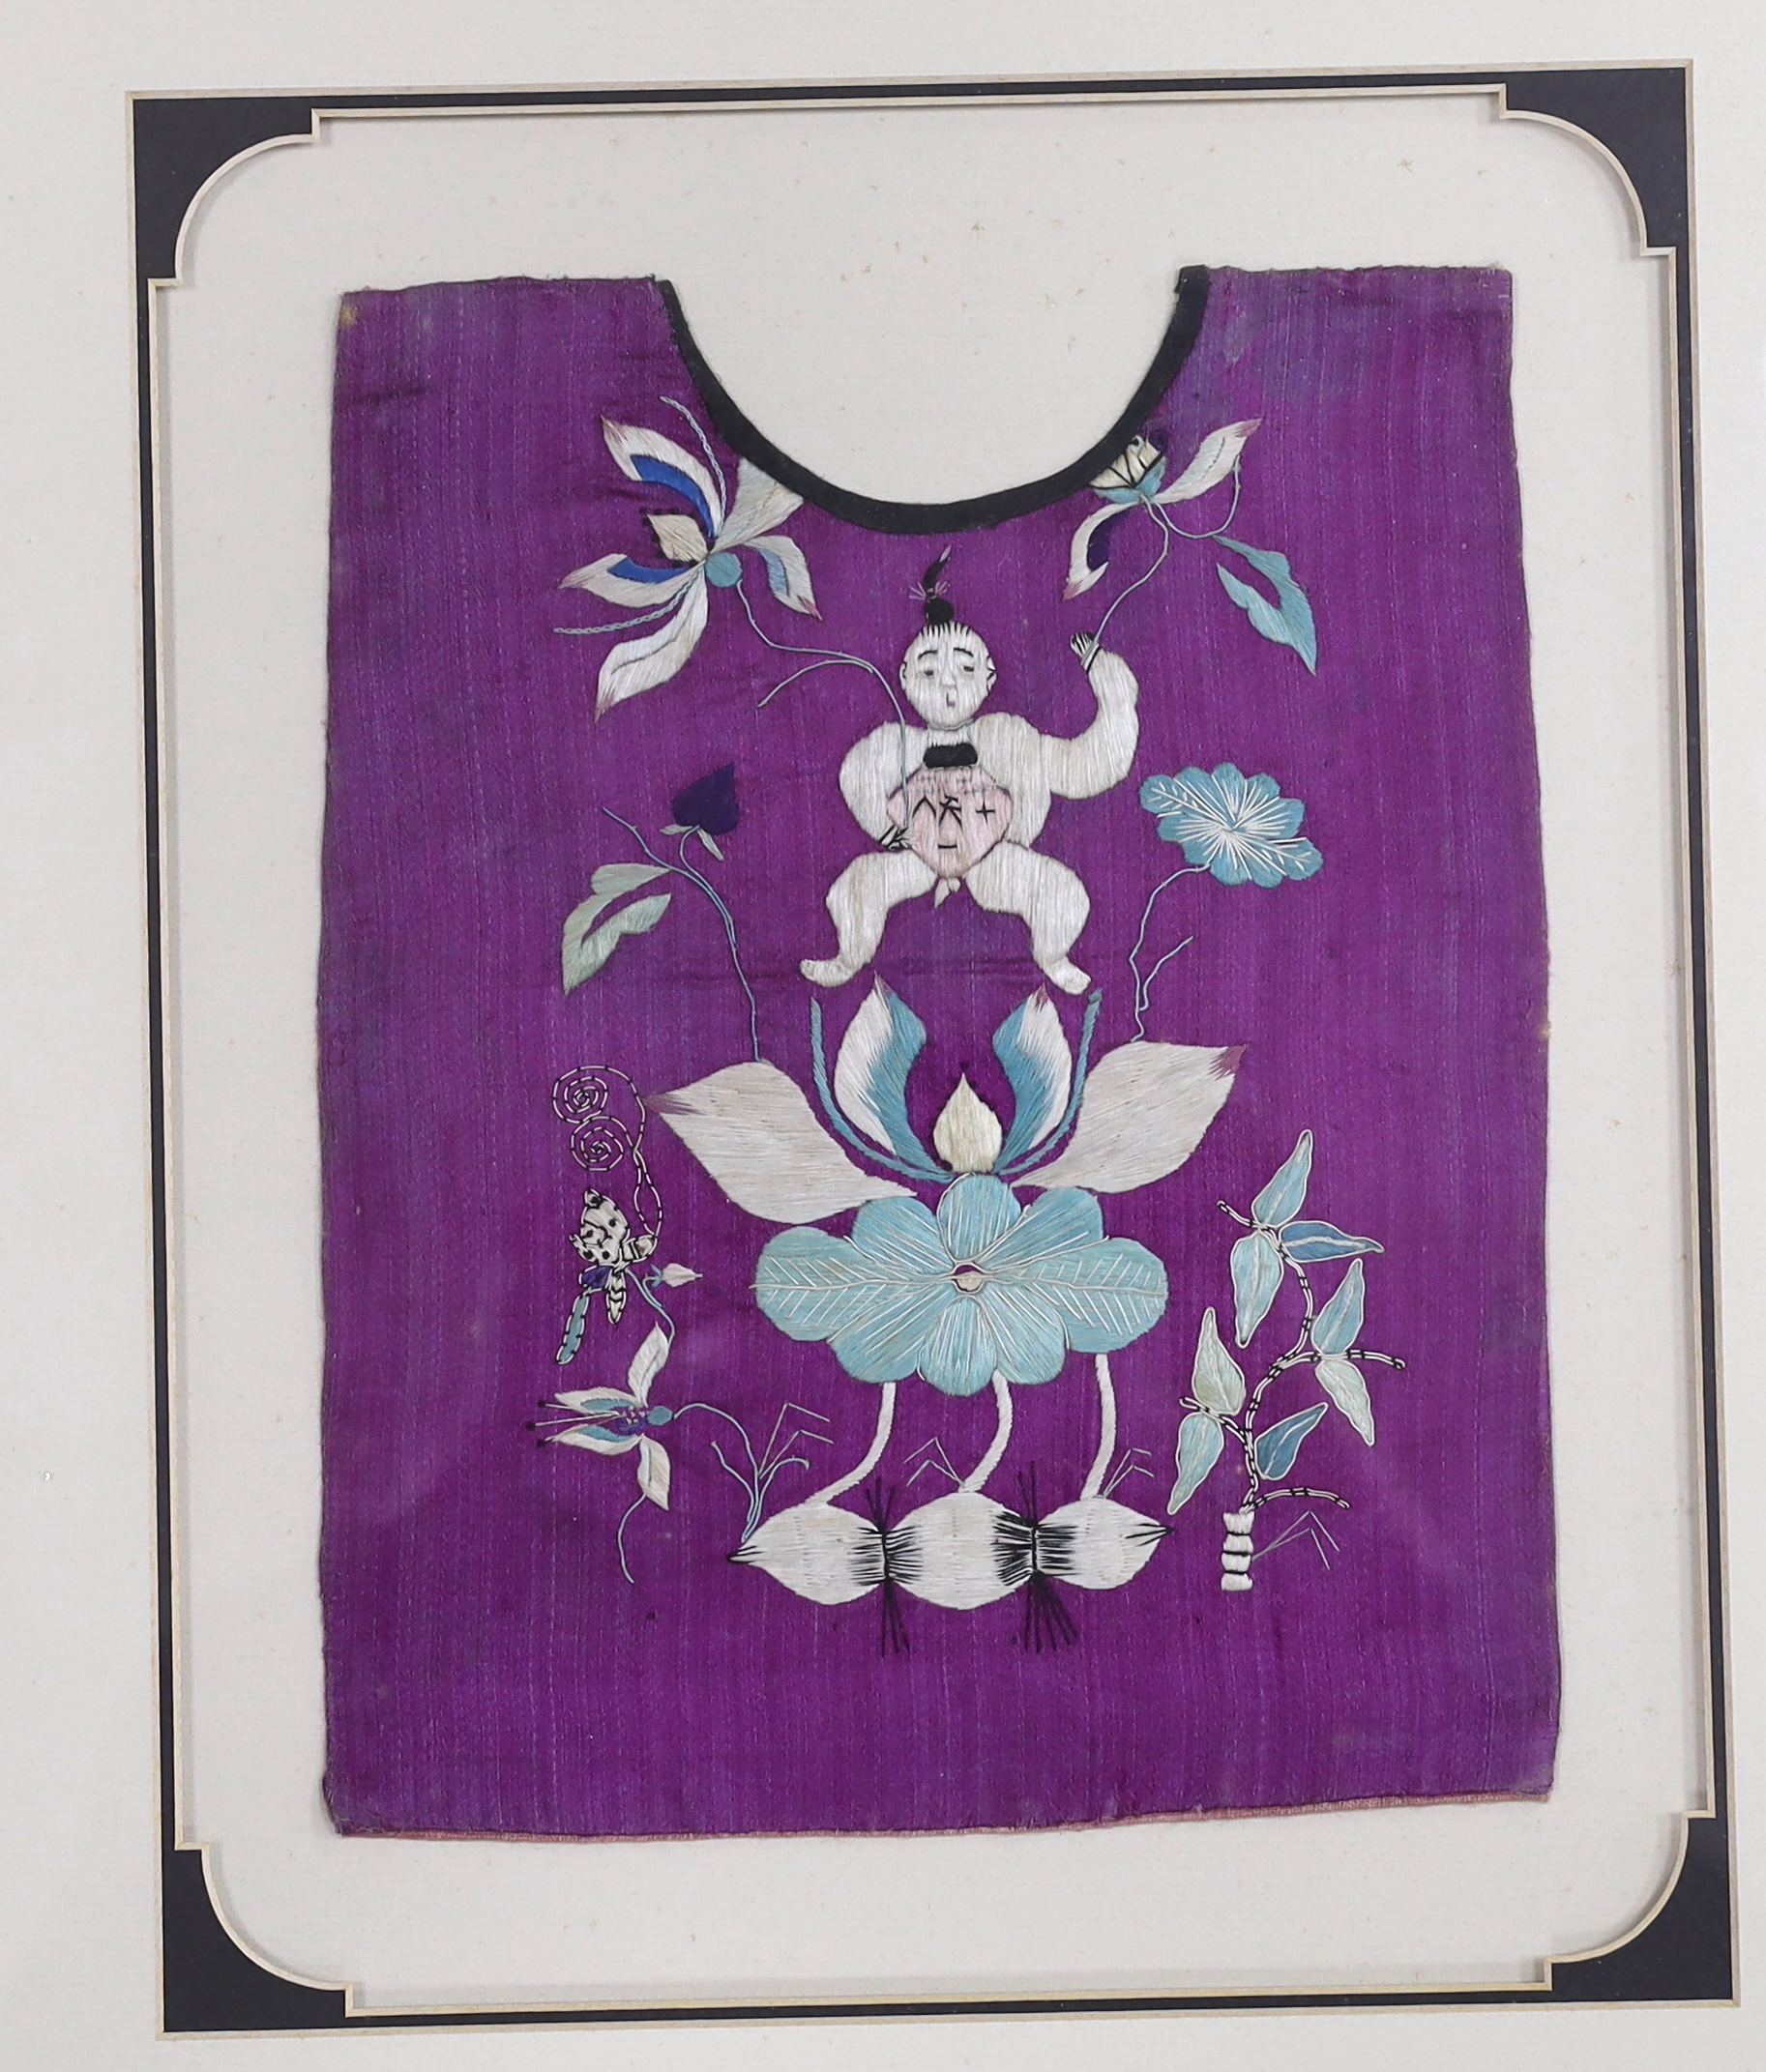 Three early 20th century Chinese framed embroideries: two purple baby’s bibs embroidered with multi-coloured silk threads, and another red silk child’s “romper suit”, embroidered with white and pastel embroidery, mounted